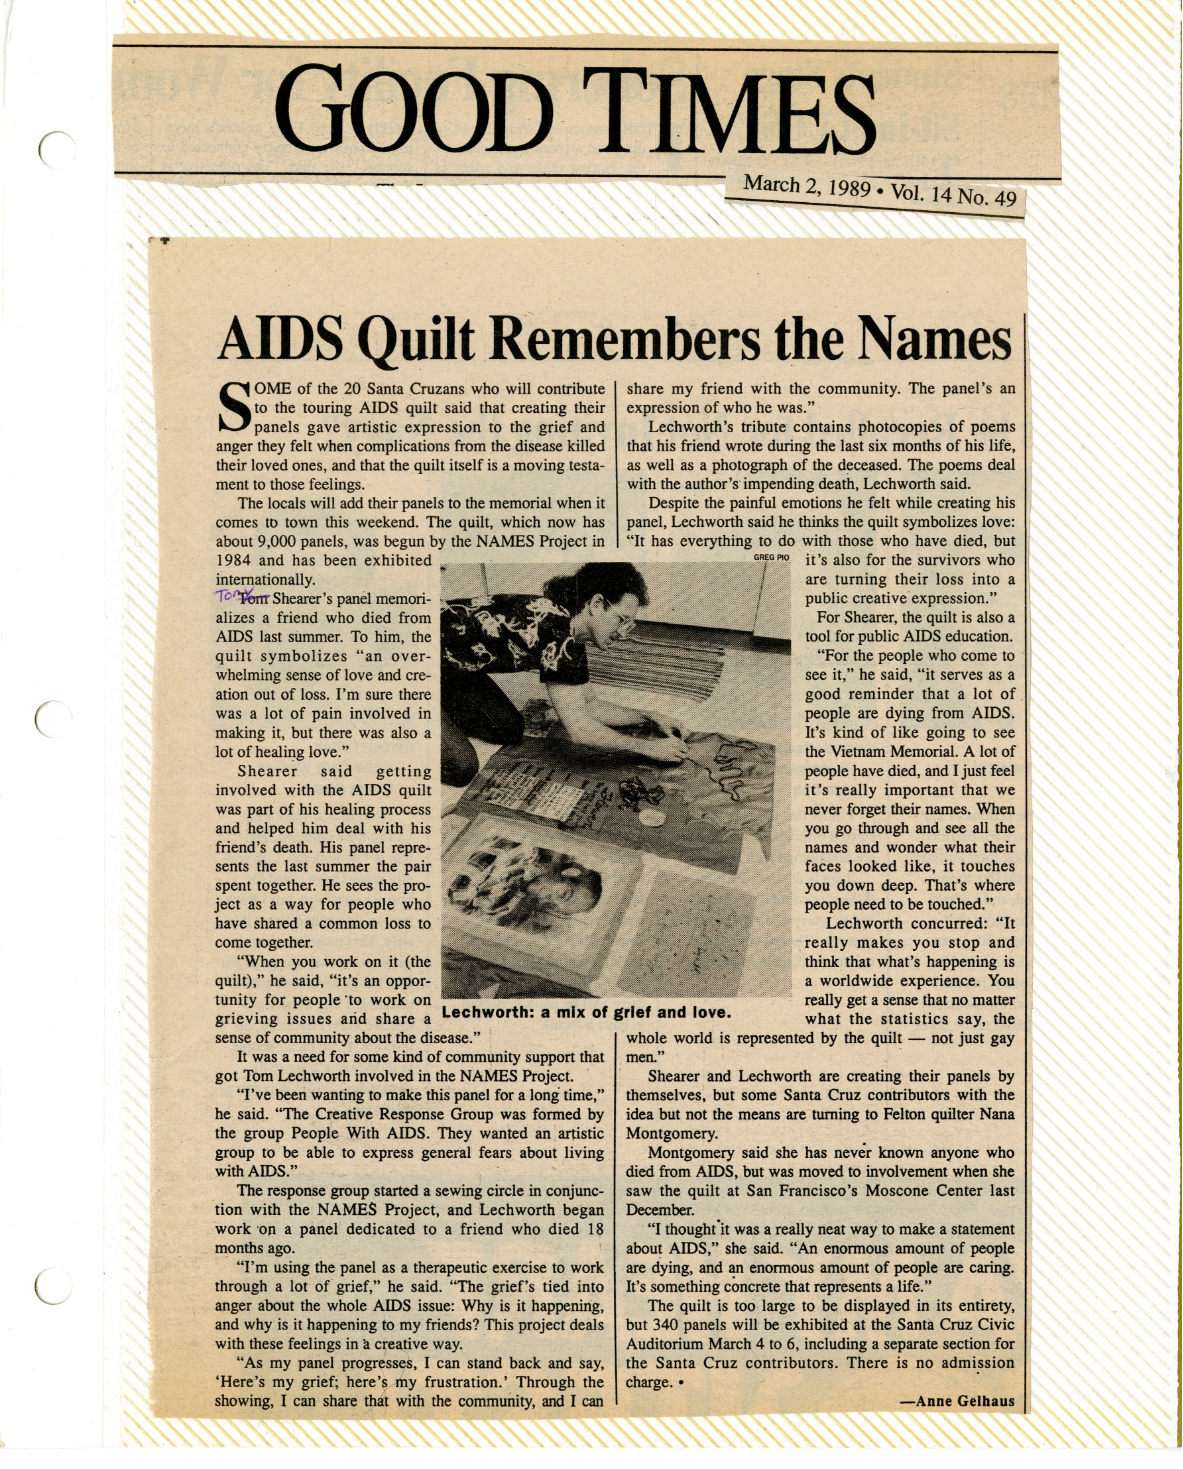 Good Times Magazine Article about AIDS Quilt, 1989.